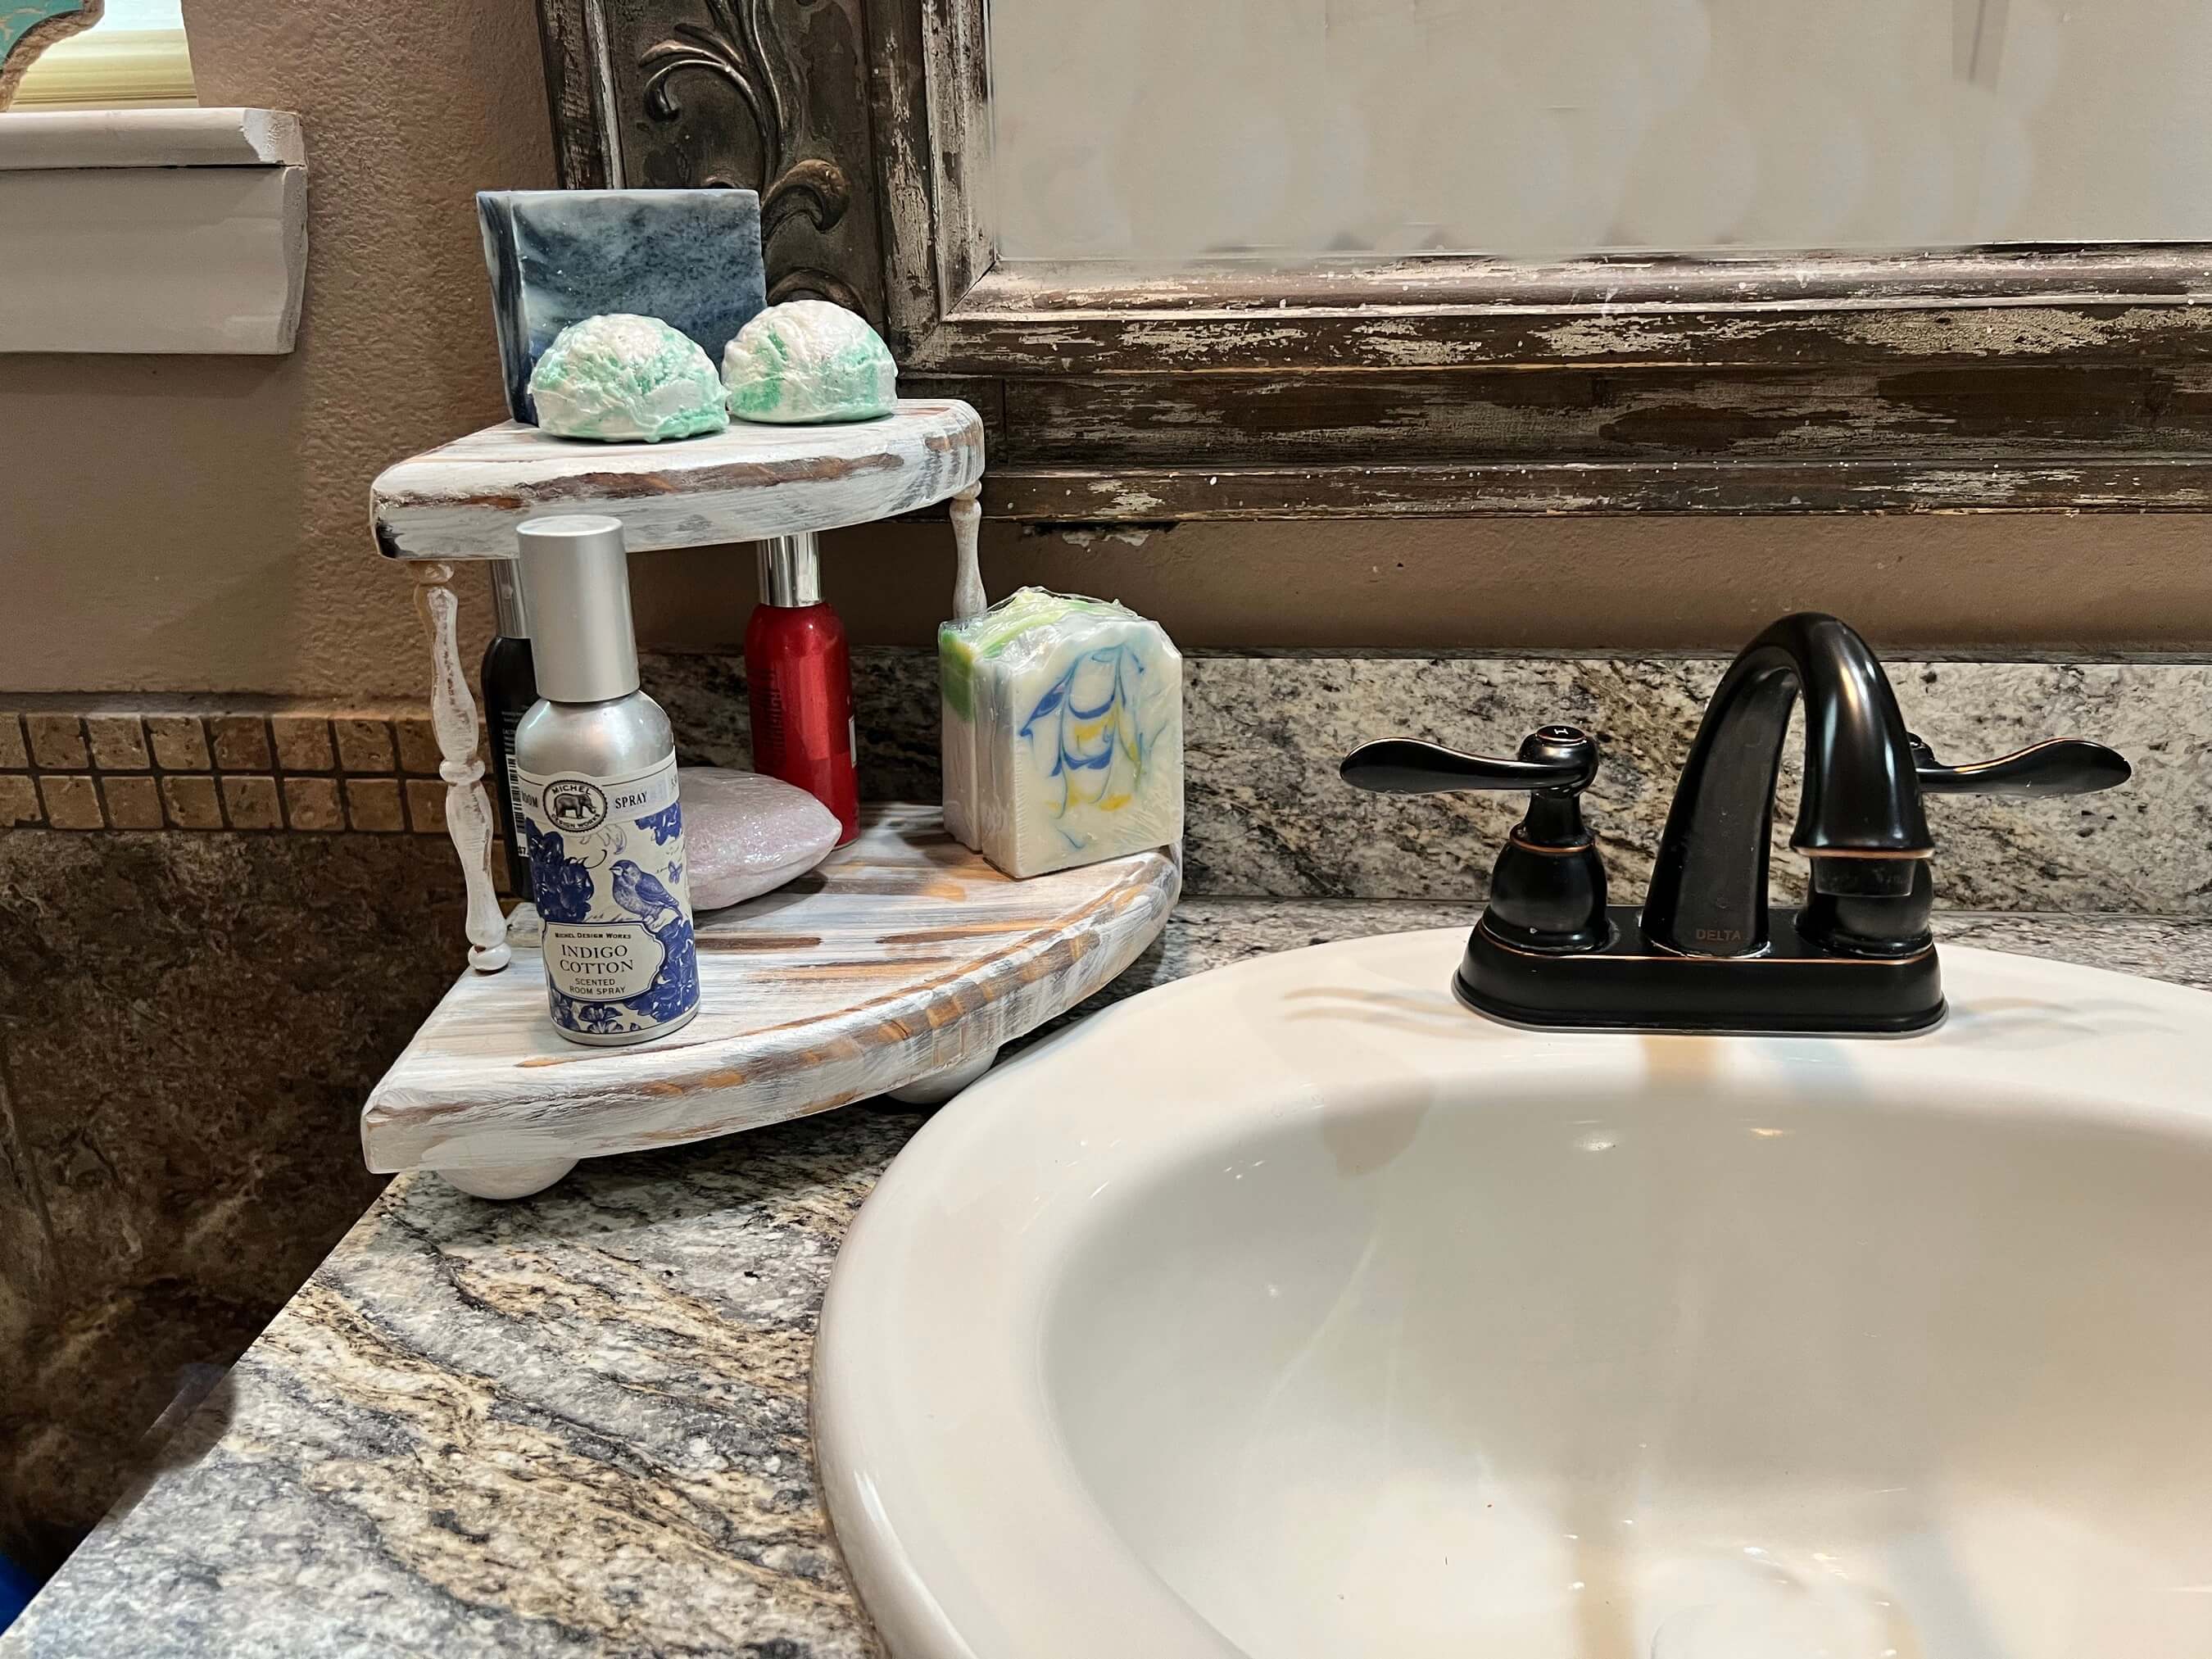 Farmhouse rustic Corner Pedestal Vanity riser shown here on the Left side of sink on bathroom countertop. Makes a great gift for country girl.